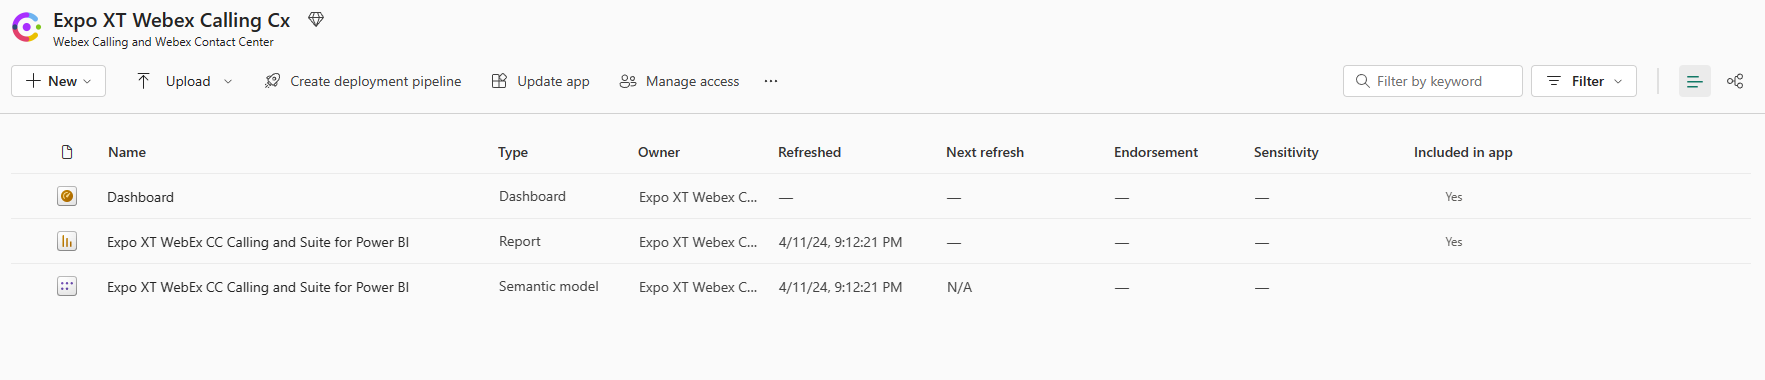 expo xt screenshot showing Manage Access options for Webex Calling